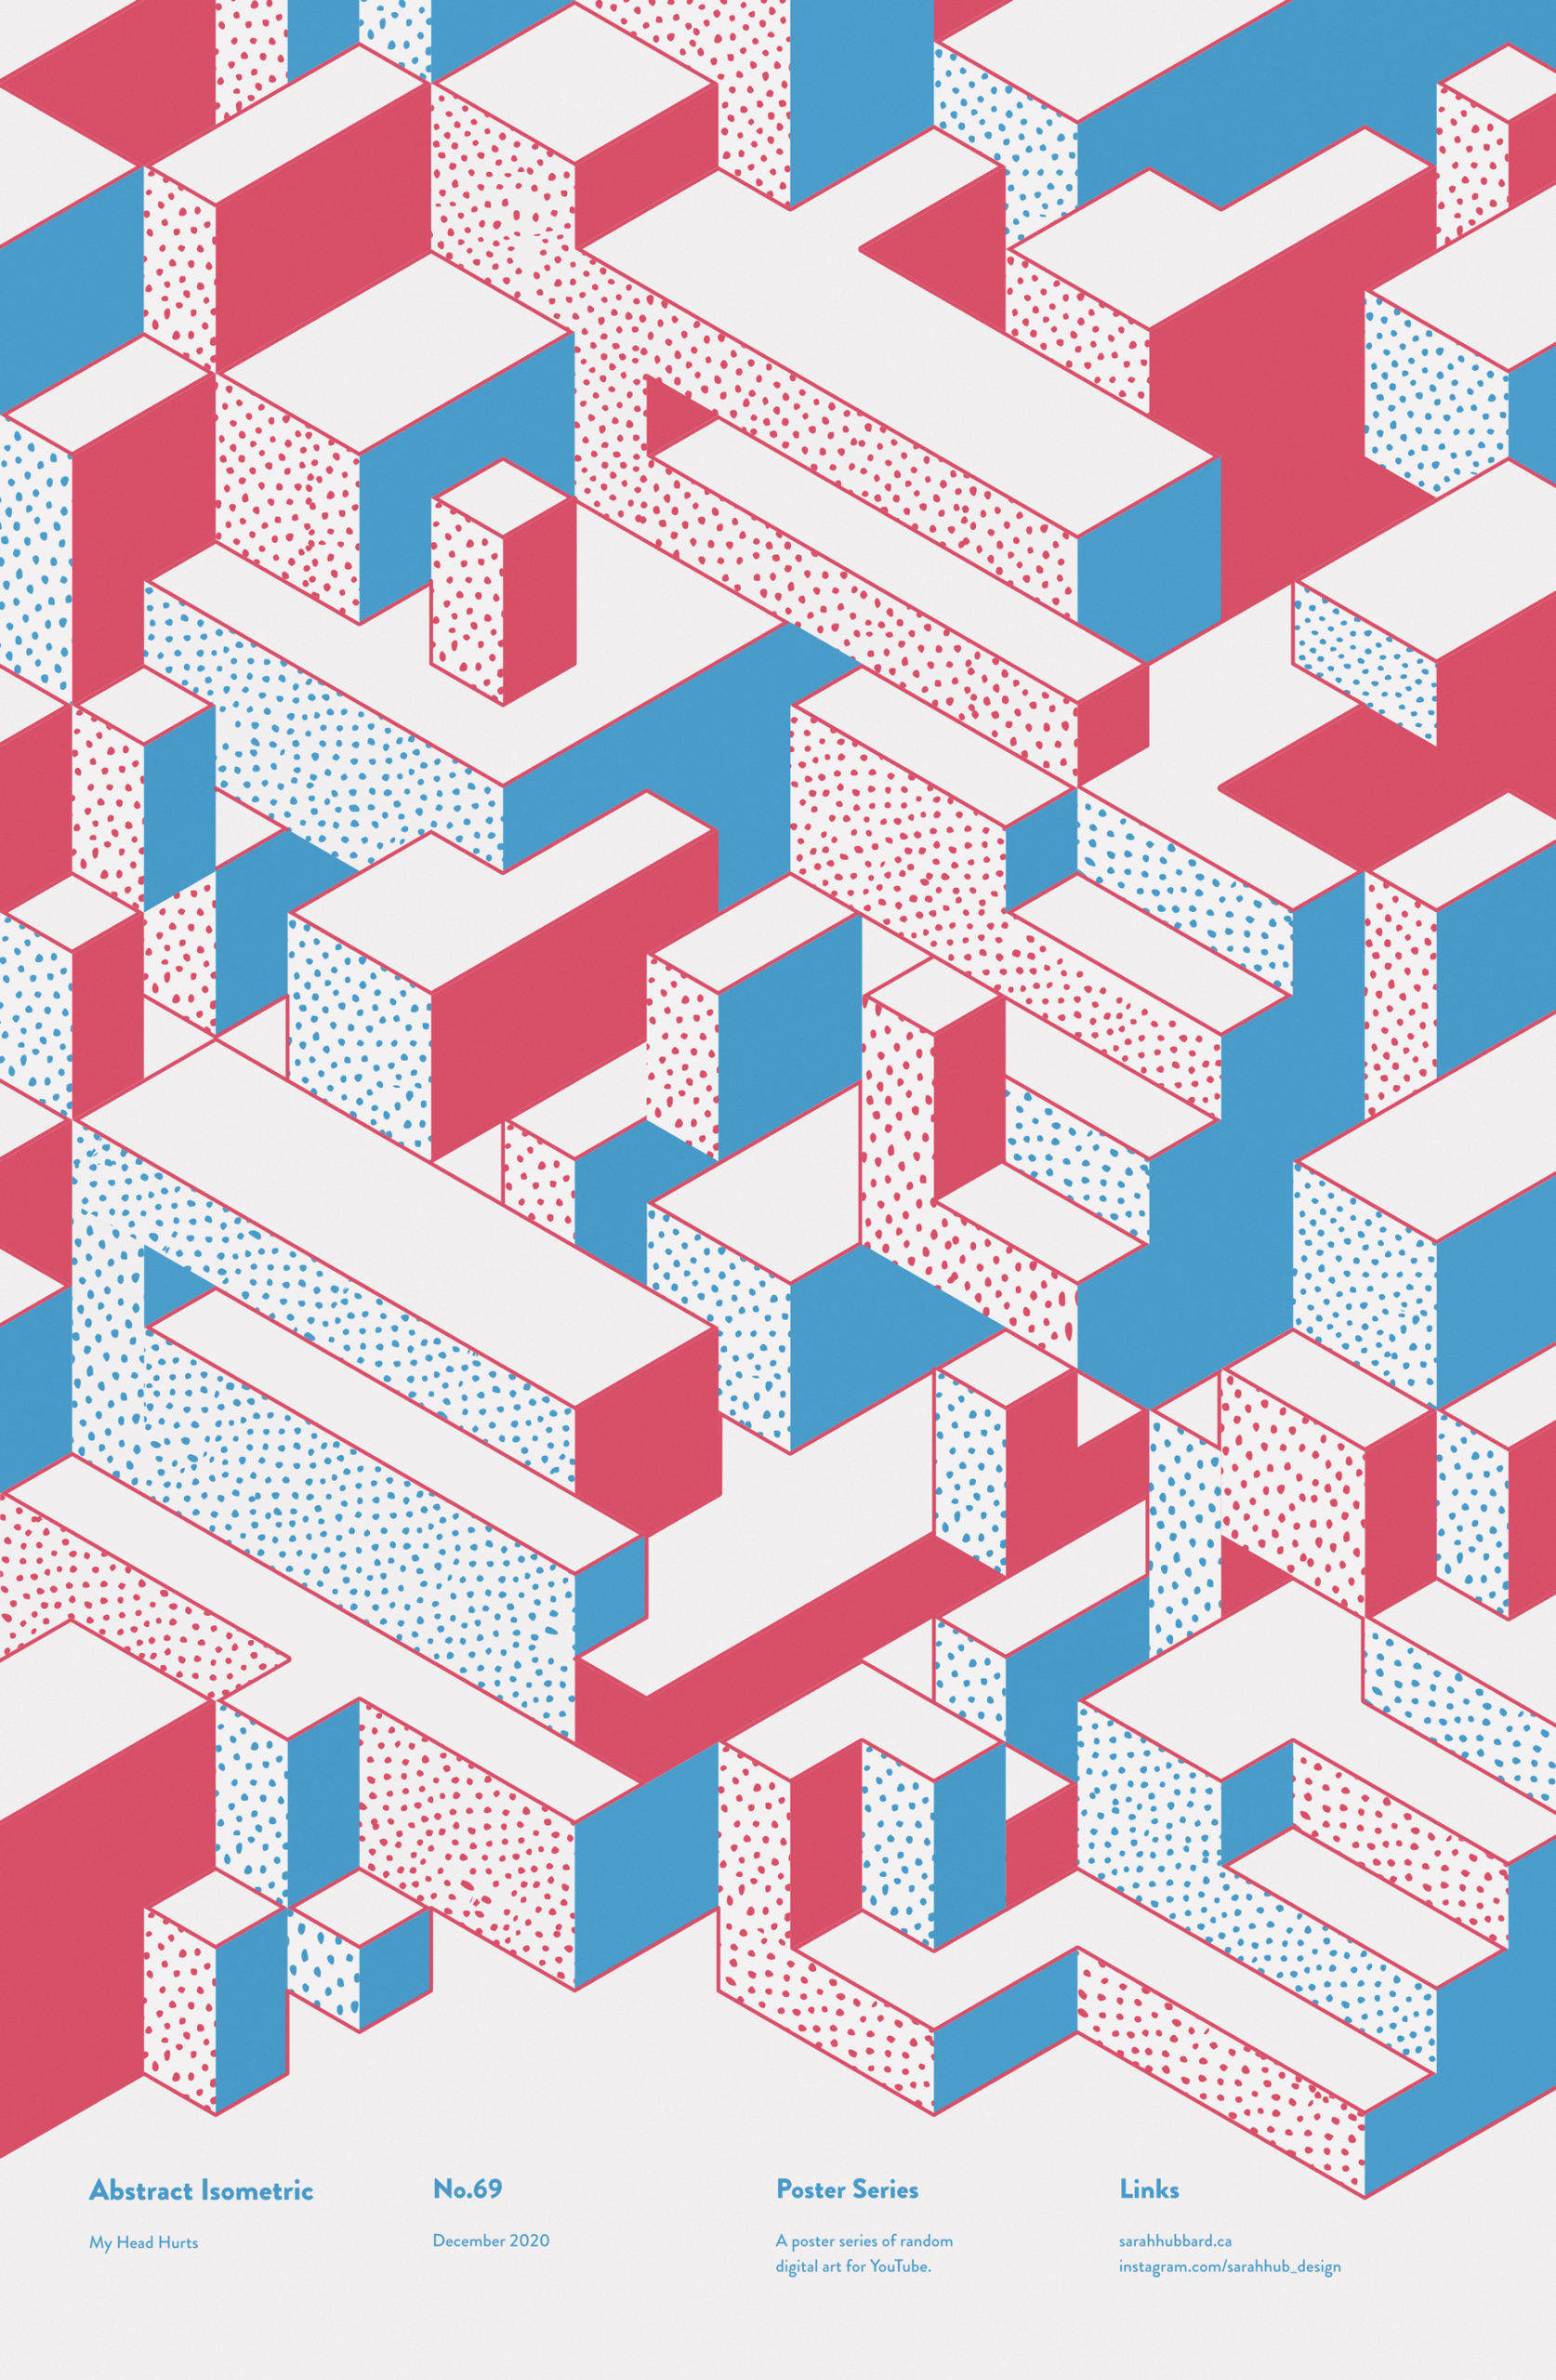 Abstract Isometric Poster Design